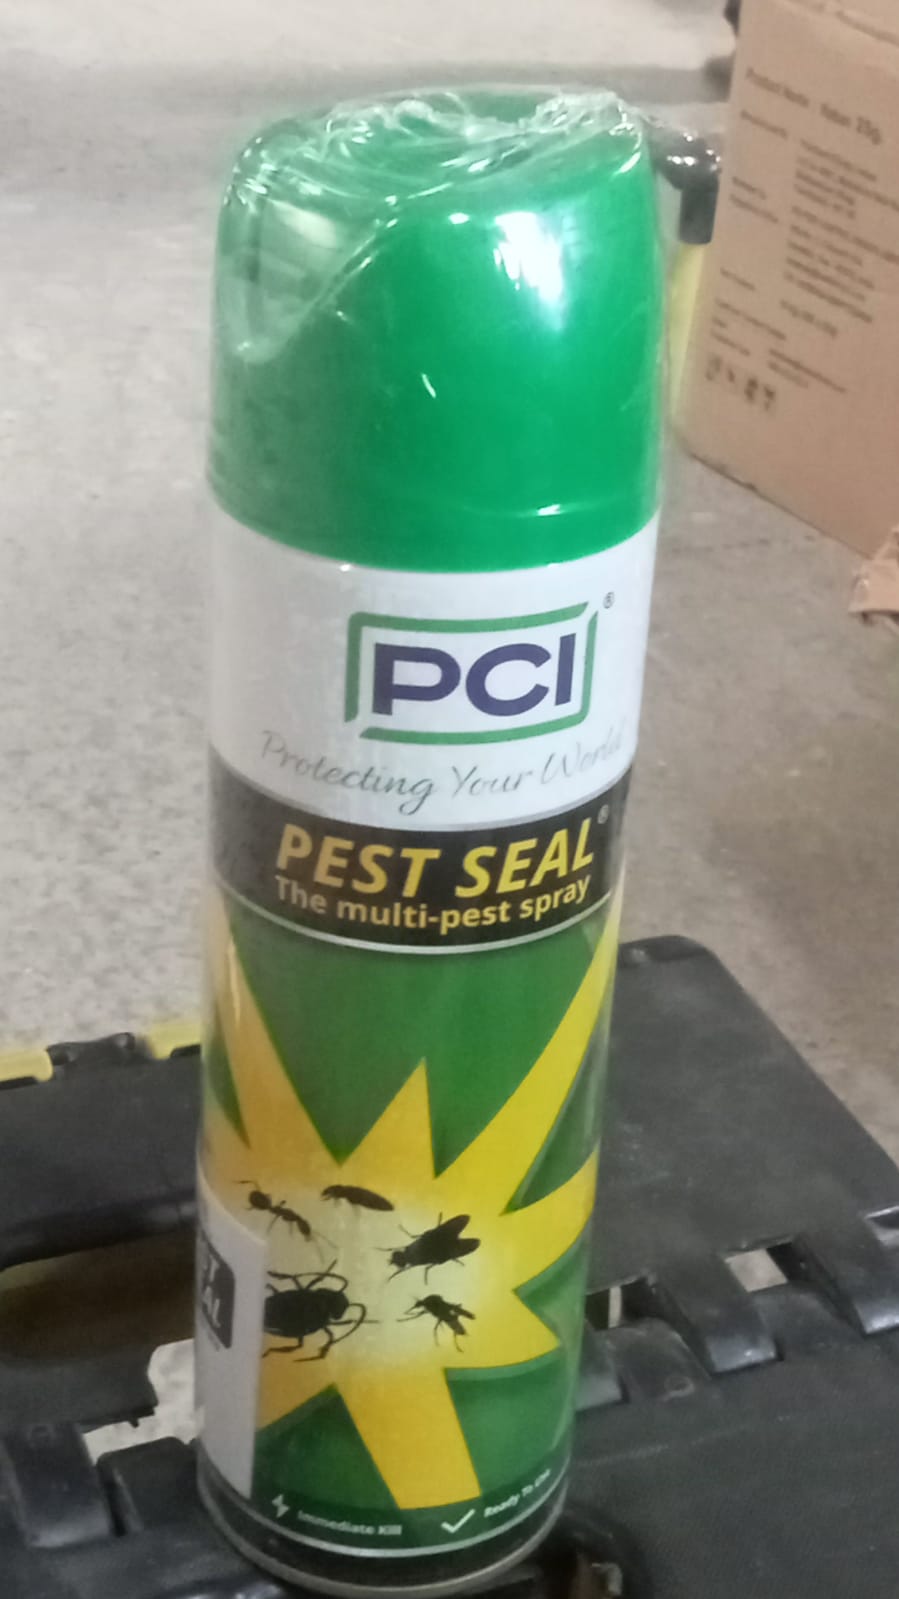 0270A Pci Pest Seal Multi Pest Spray 500 ML, For Personal,  PCI Aerosol Spray for All Flying and crawling insects such as flies, mosquitoes, cockroaches, etc (500 ML)